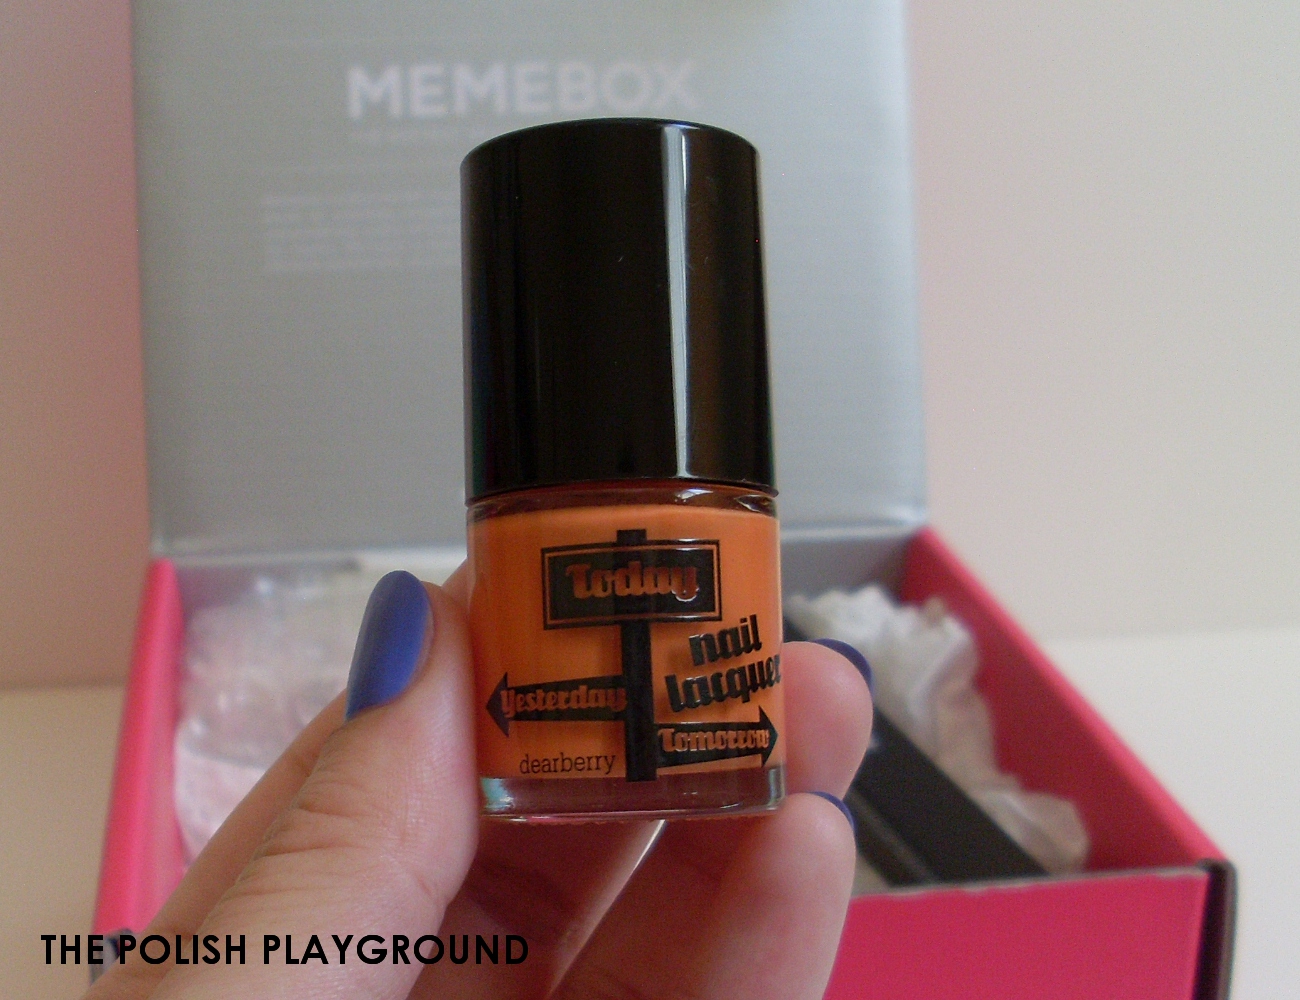 Memebox Colorbox #2 Orange Unboxing - Dearberry Today Nail Lacquer #20 Fantasy